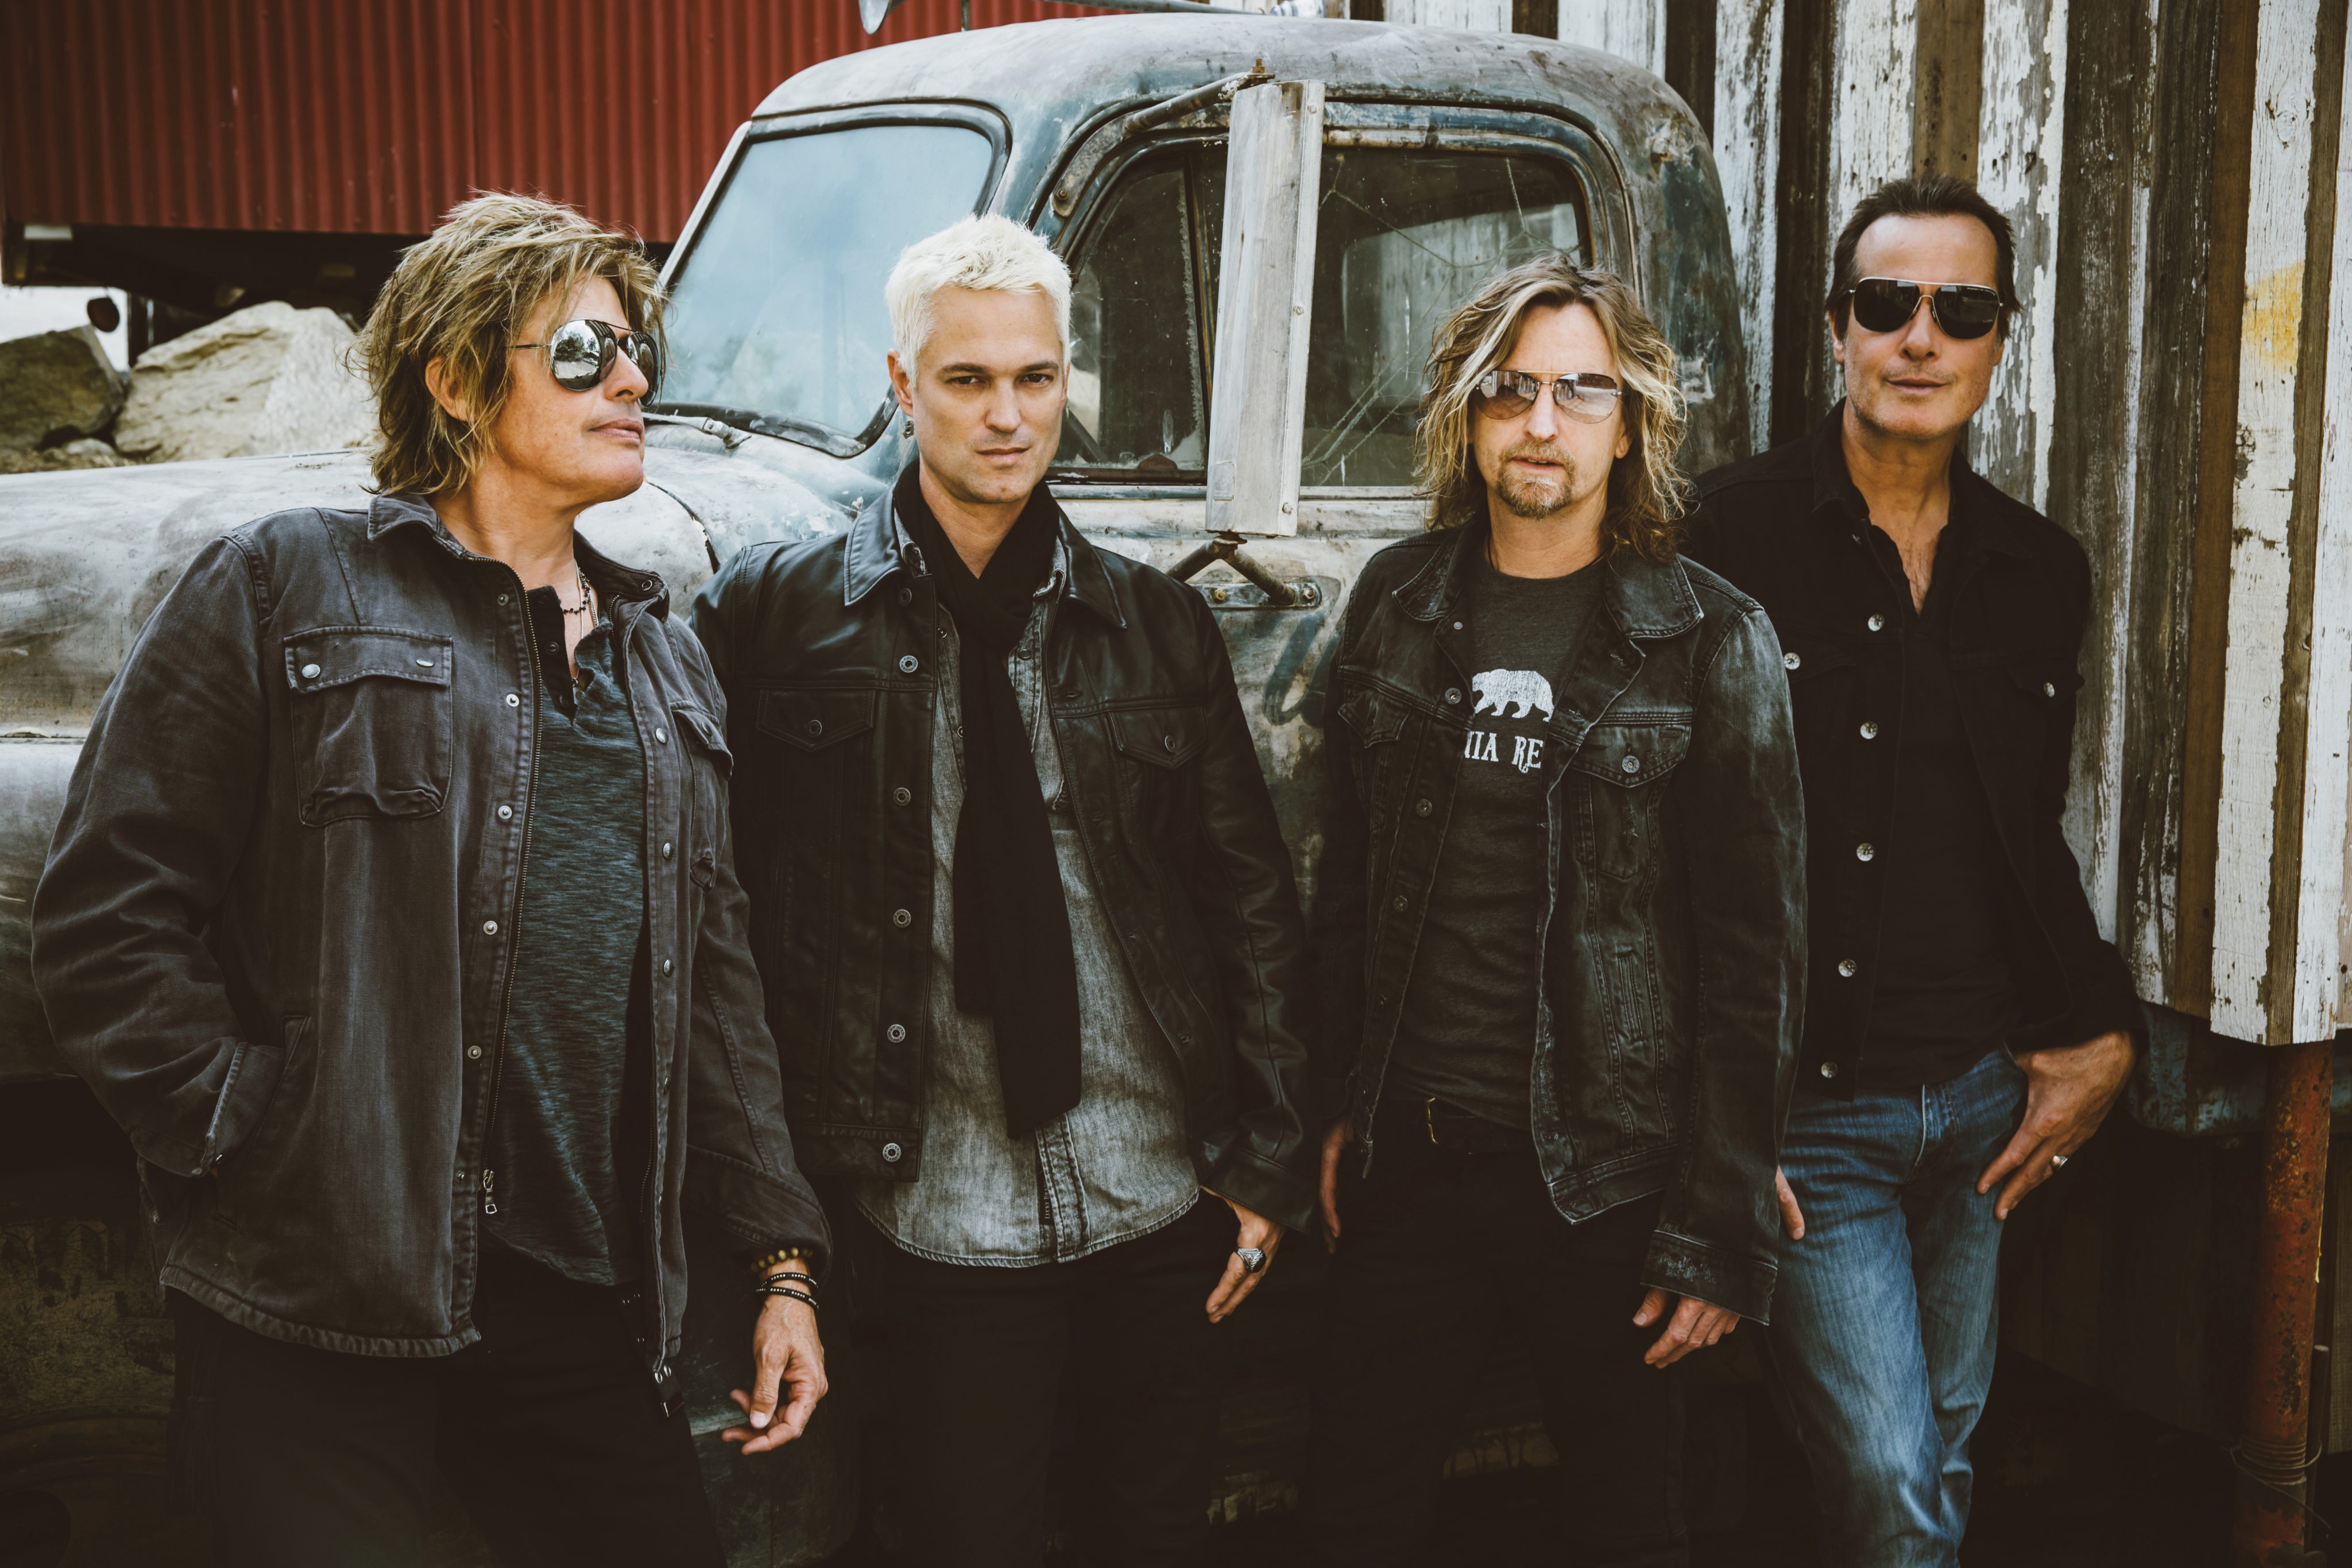 Stone Temple Pilots’ Robert DeLeo on the Band’s Remarkable Year and